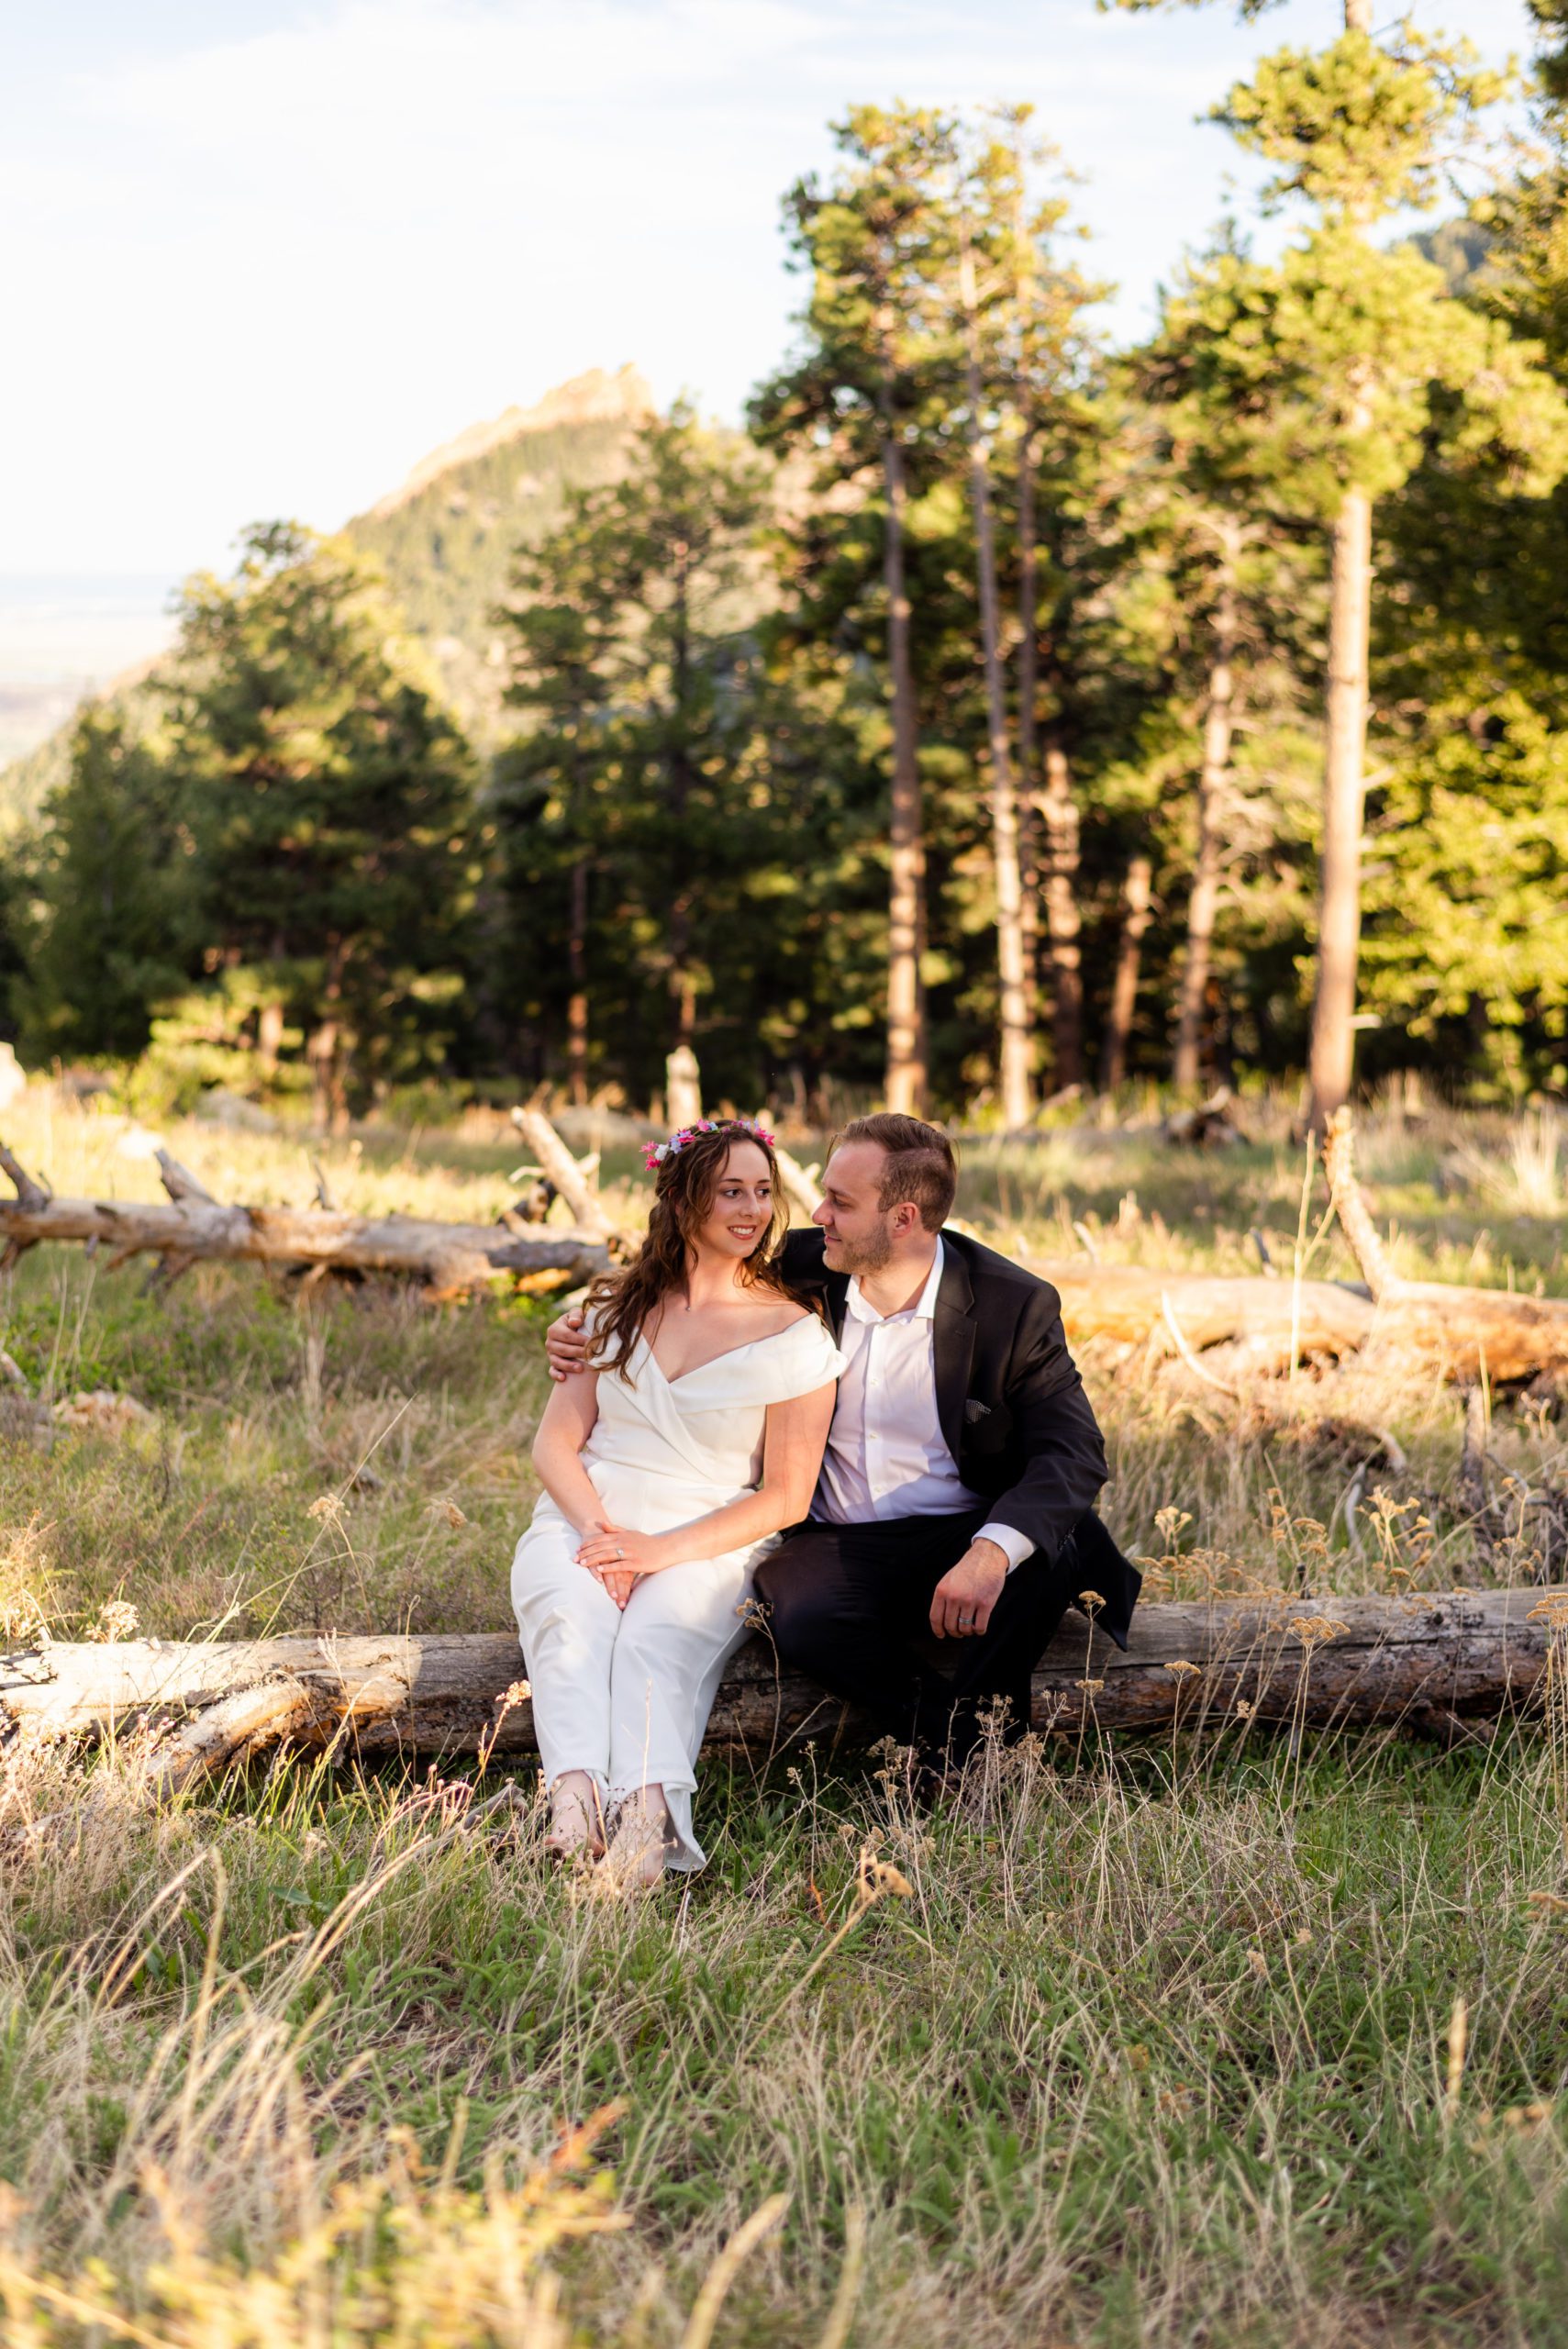 The bride smiles sweetly at her groom while they sit together on a log during their Boulder hiking elopement near realization point.